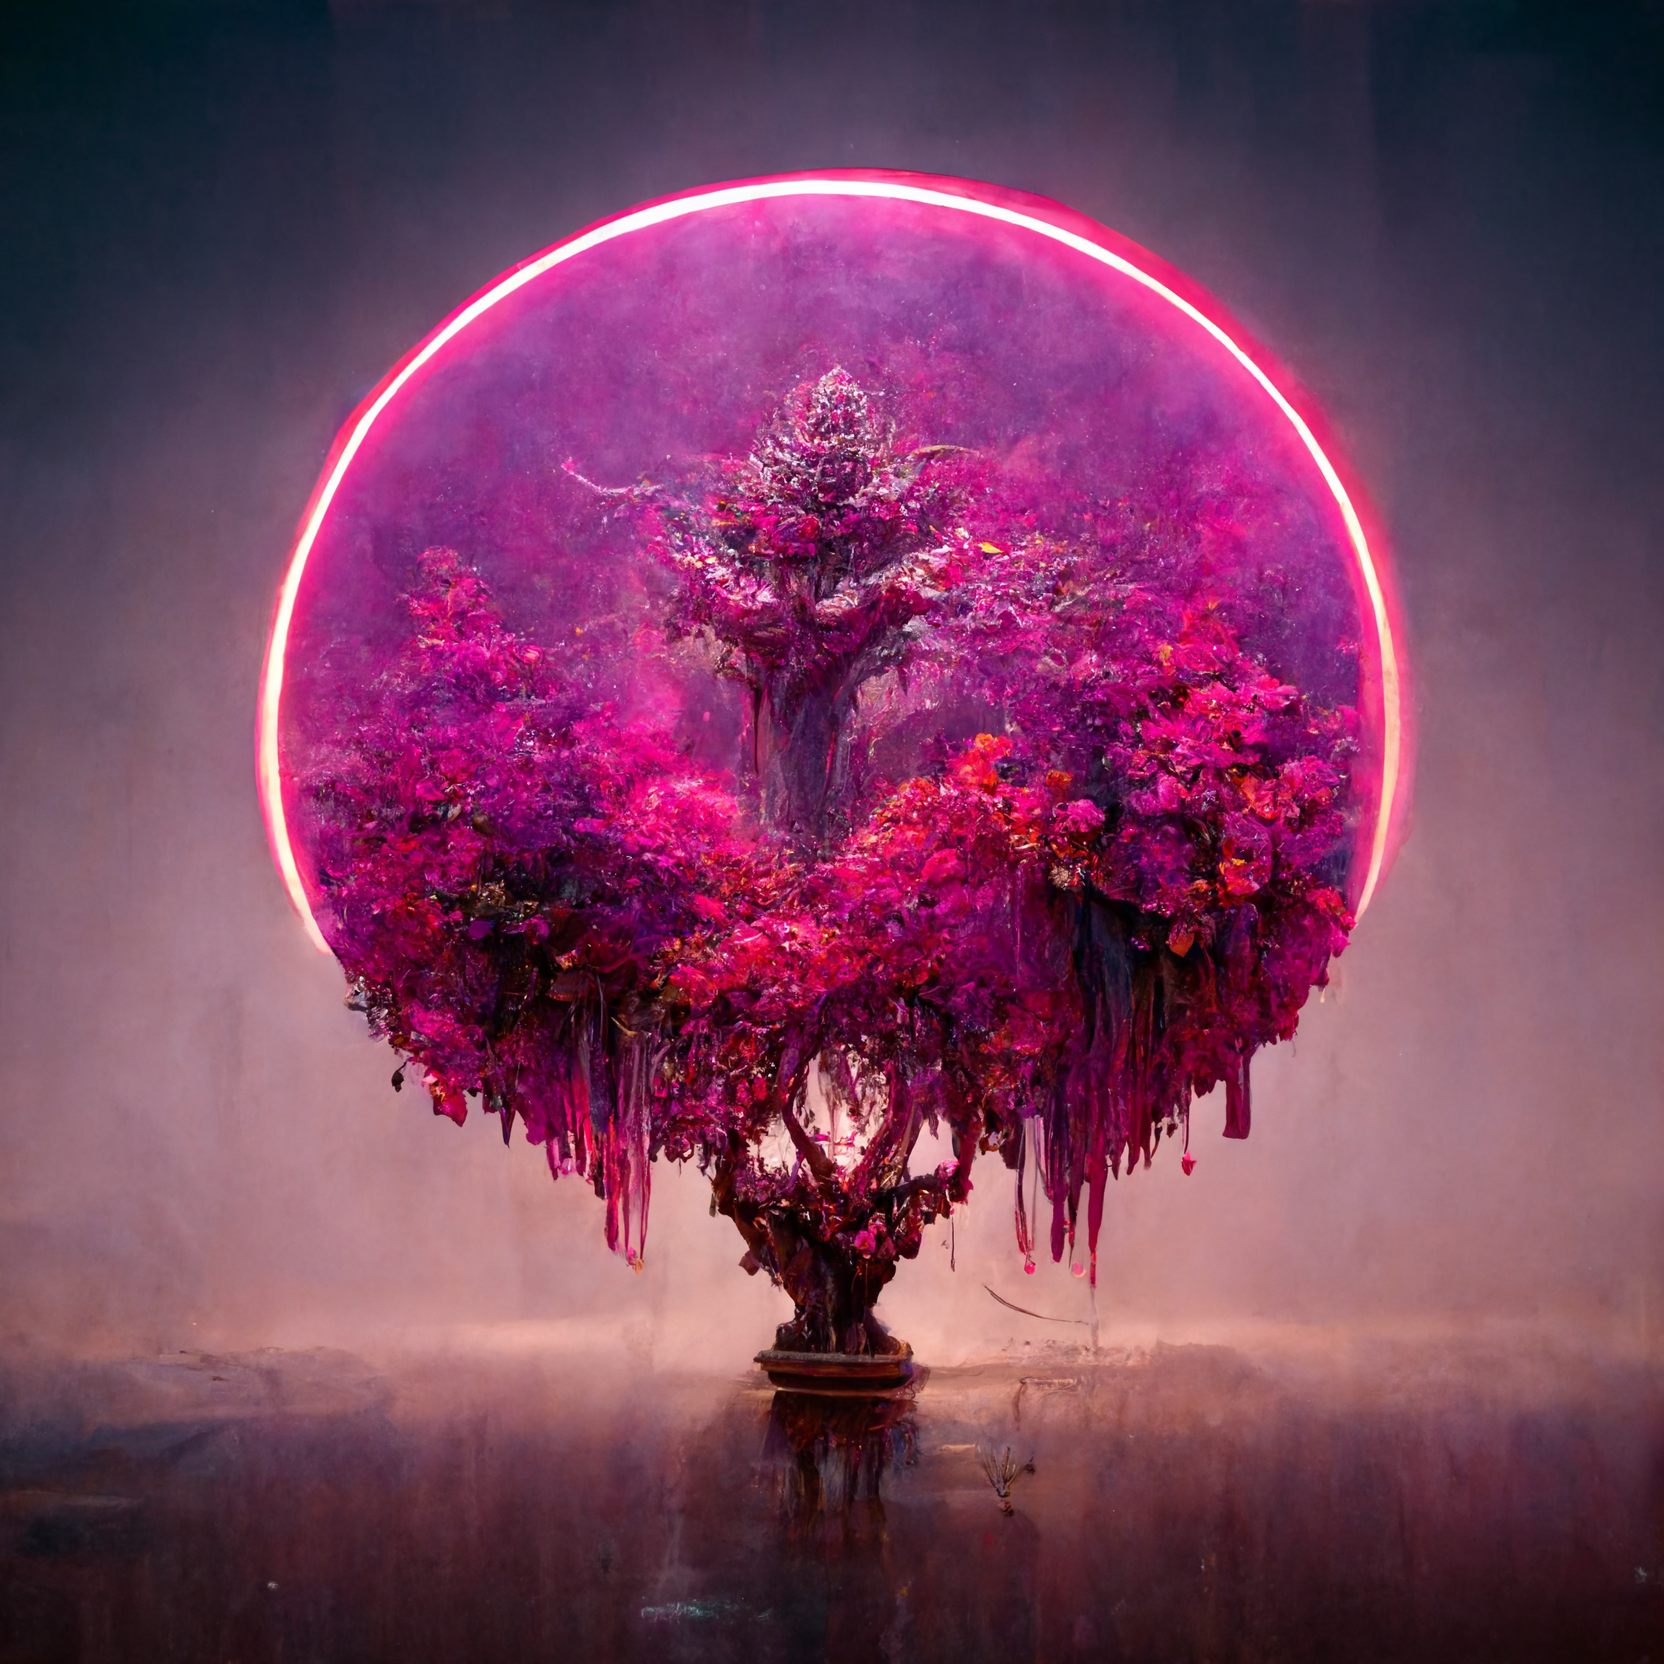 https://hips.hearstapps.com/hmg-prod/images/dnmardesich-a-beautiful-lush-magenta-forest-and-warm-sun-with-a-cd1d8714-73fe-4844-8f98-ecd970e429f3-1669915039.png